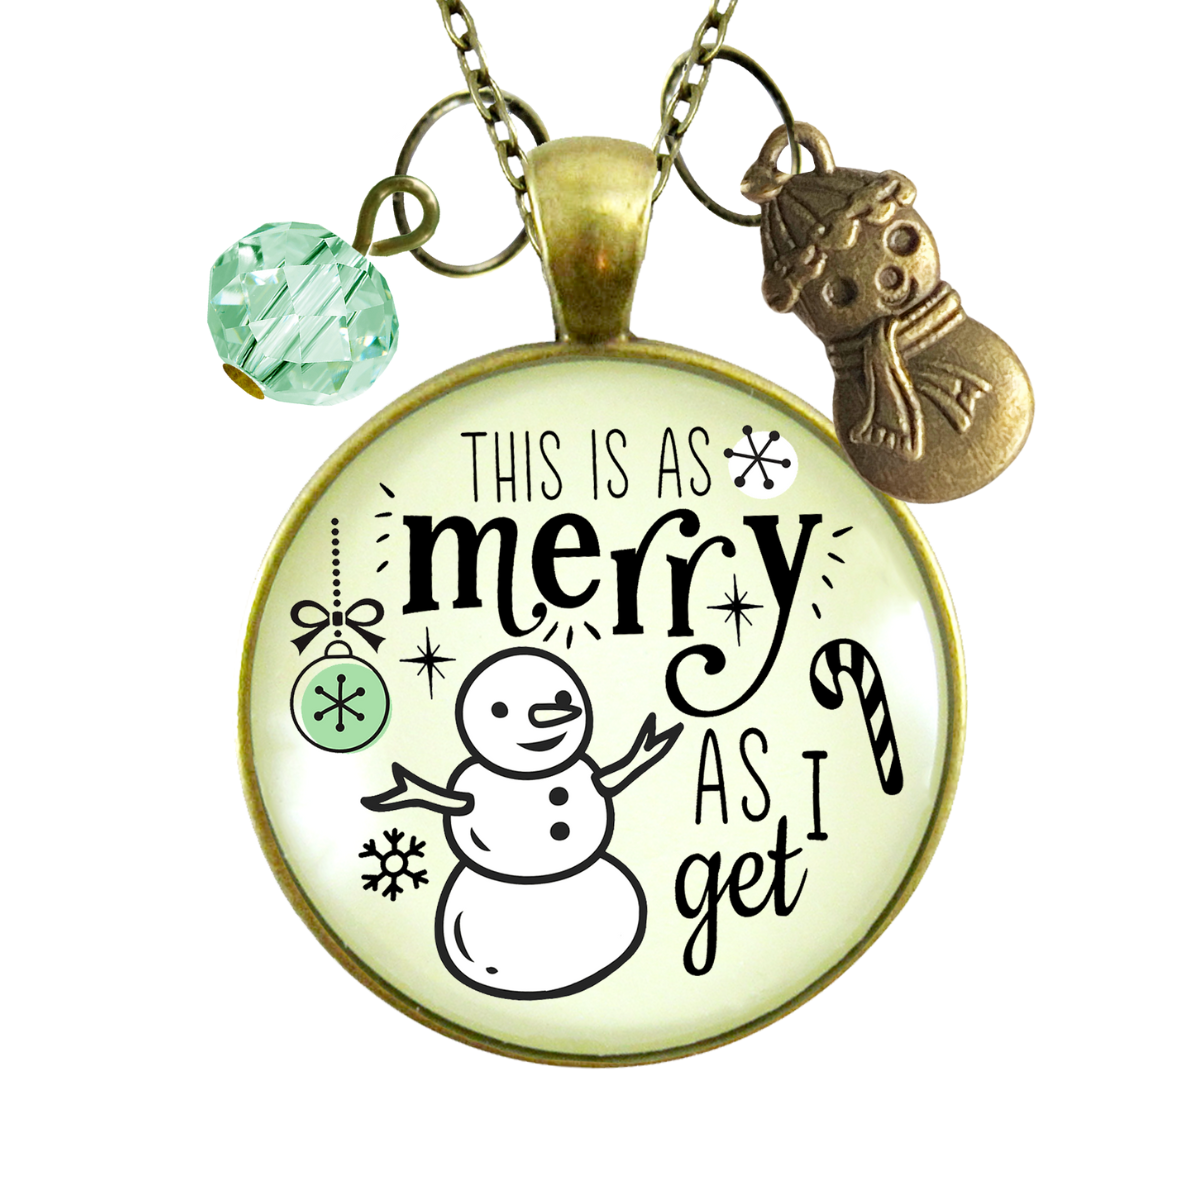 Christmas Snowman Necklace As Merry As I Get Funny Holiday Seasonal Jewelry Charm Beads Glass Pendant  Necklace - Gutsy Goodness Handmade Jewelry